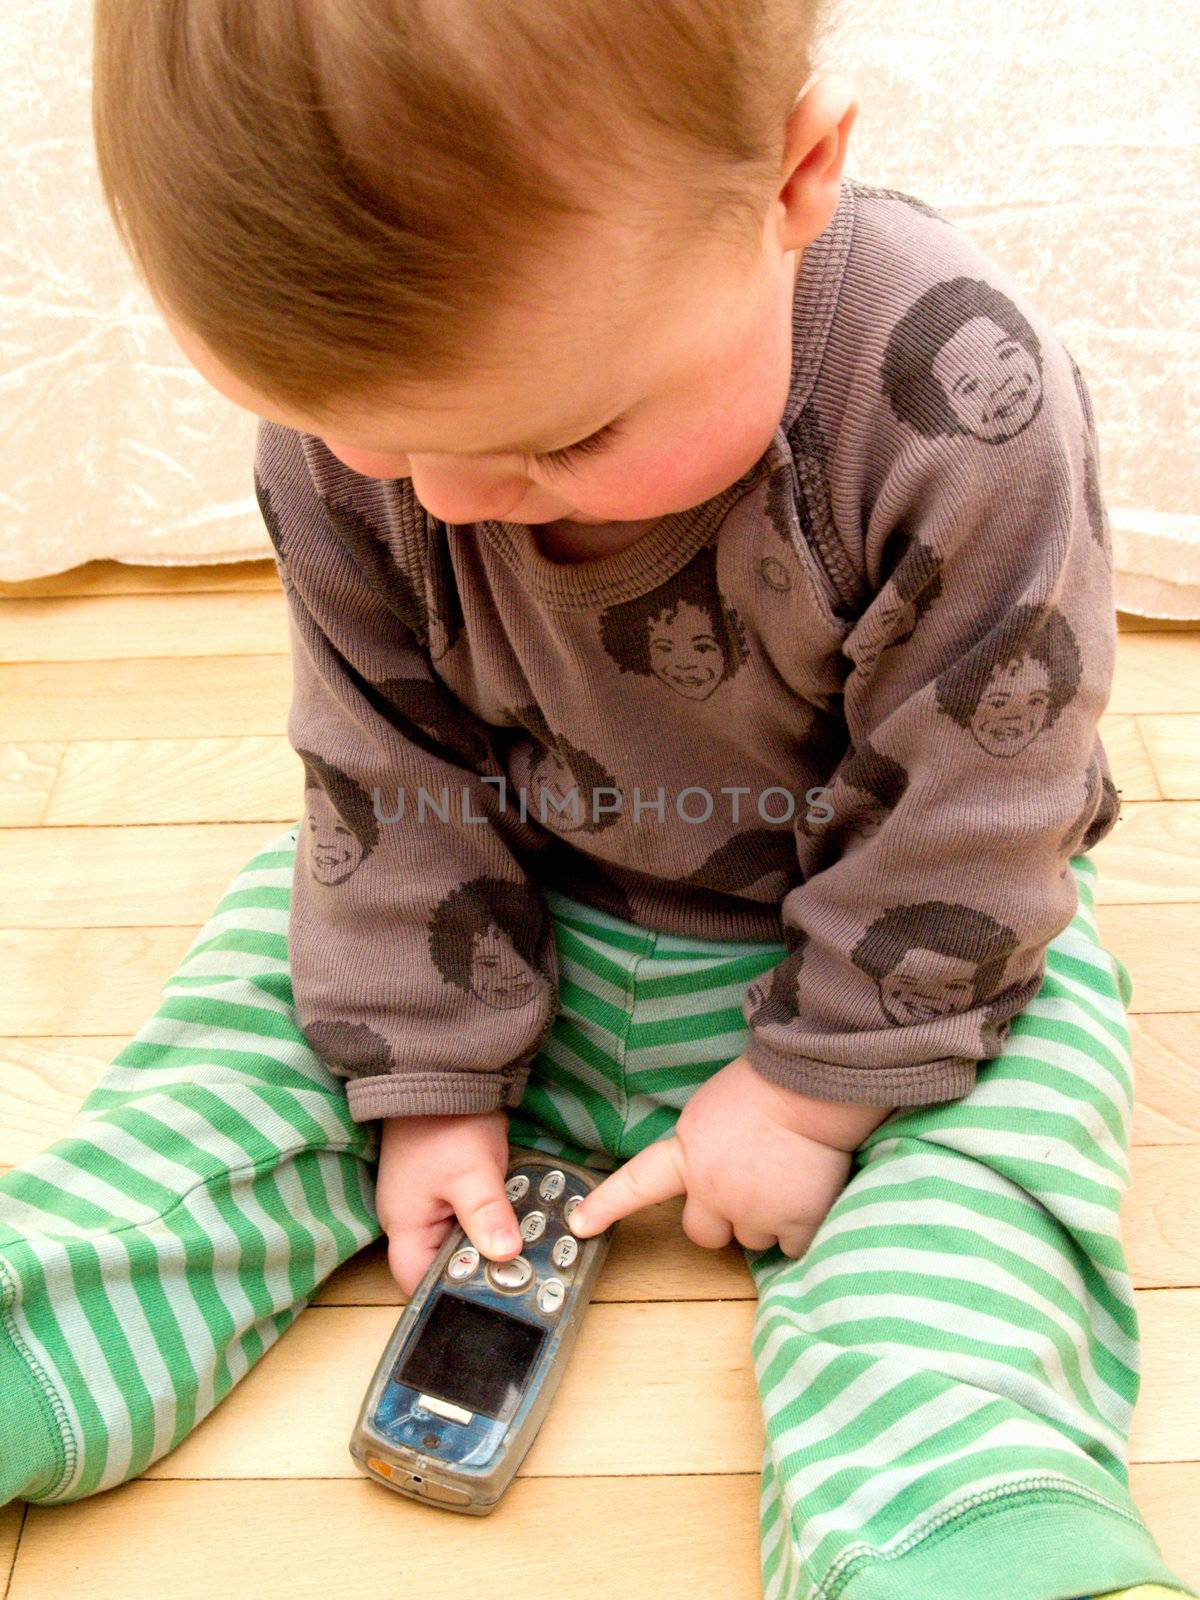 Portrait of baby boy using cell phone